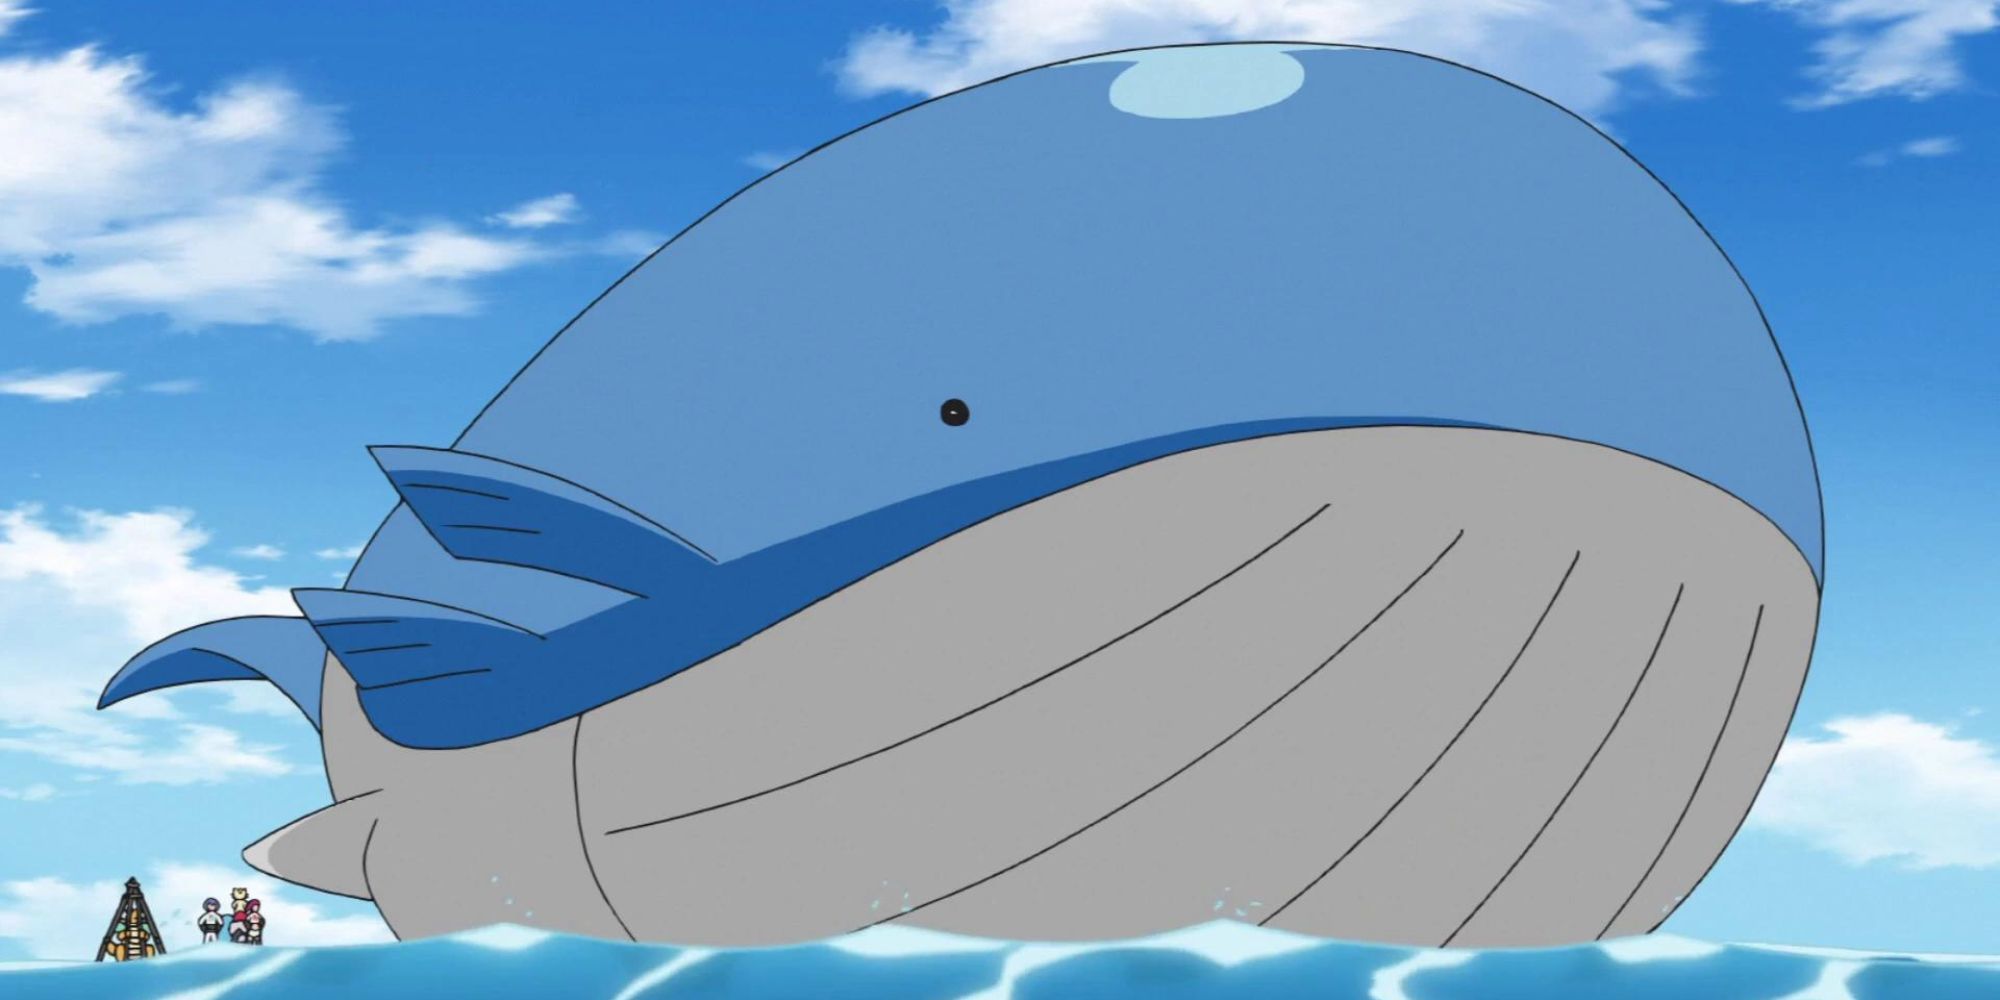 Wailord towers over Pokemon Trainers while floating in the ocean